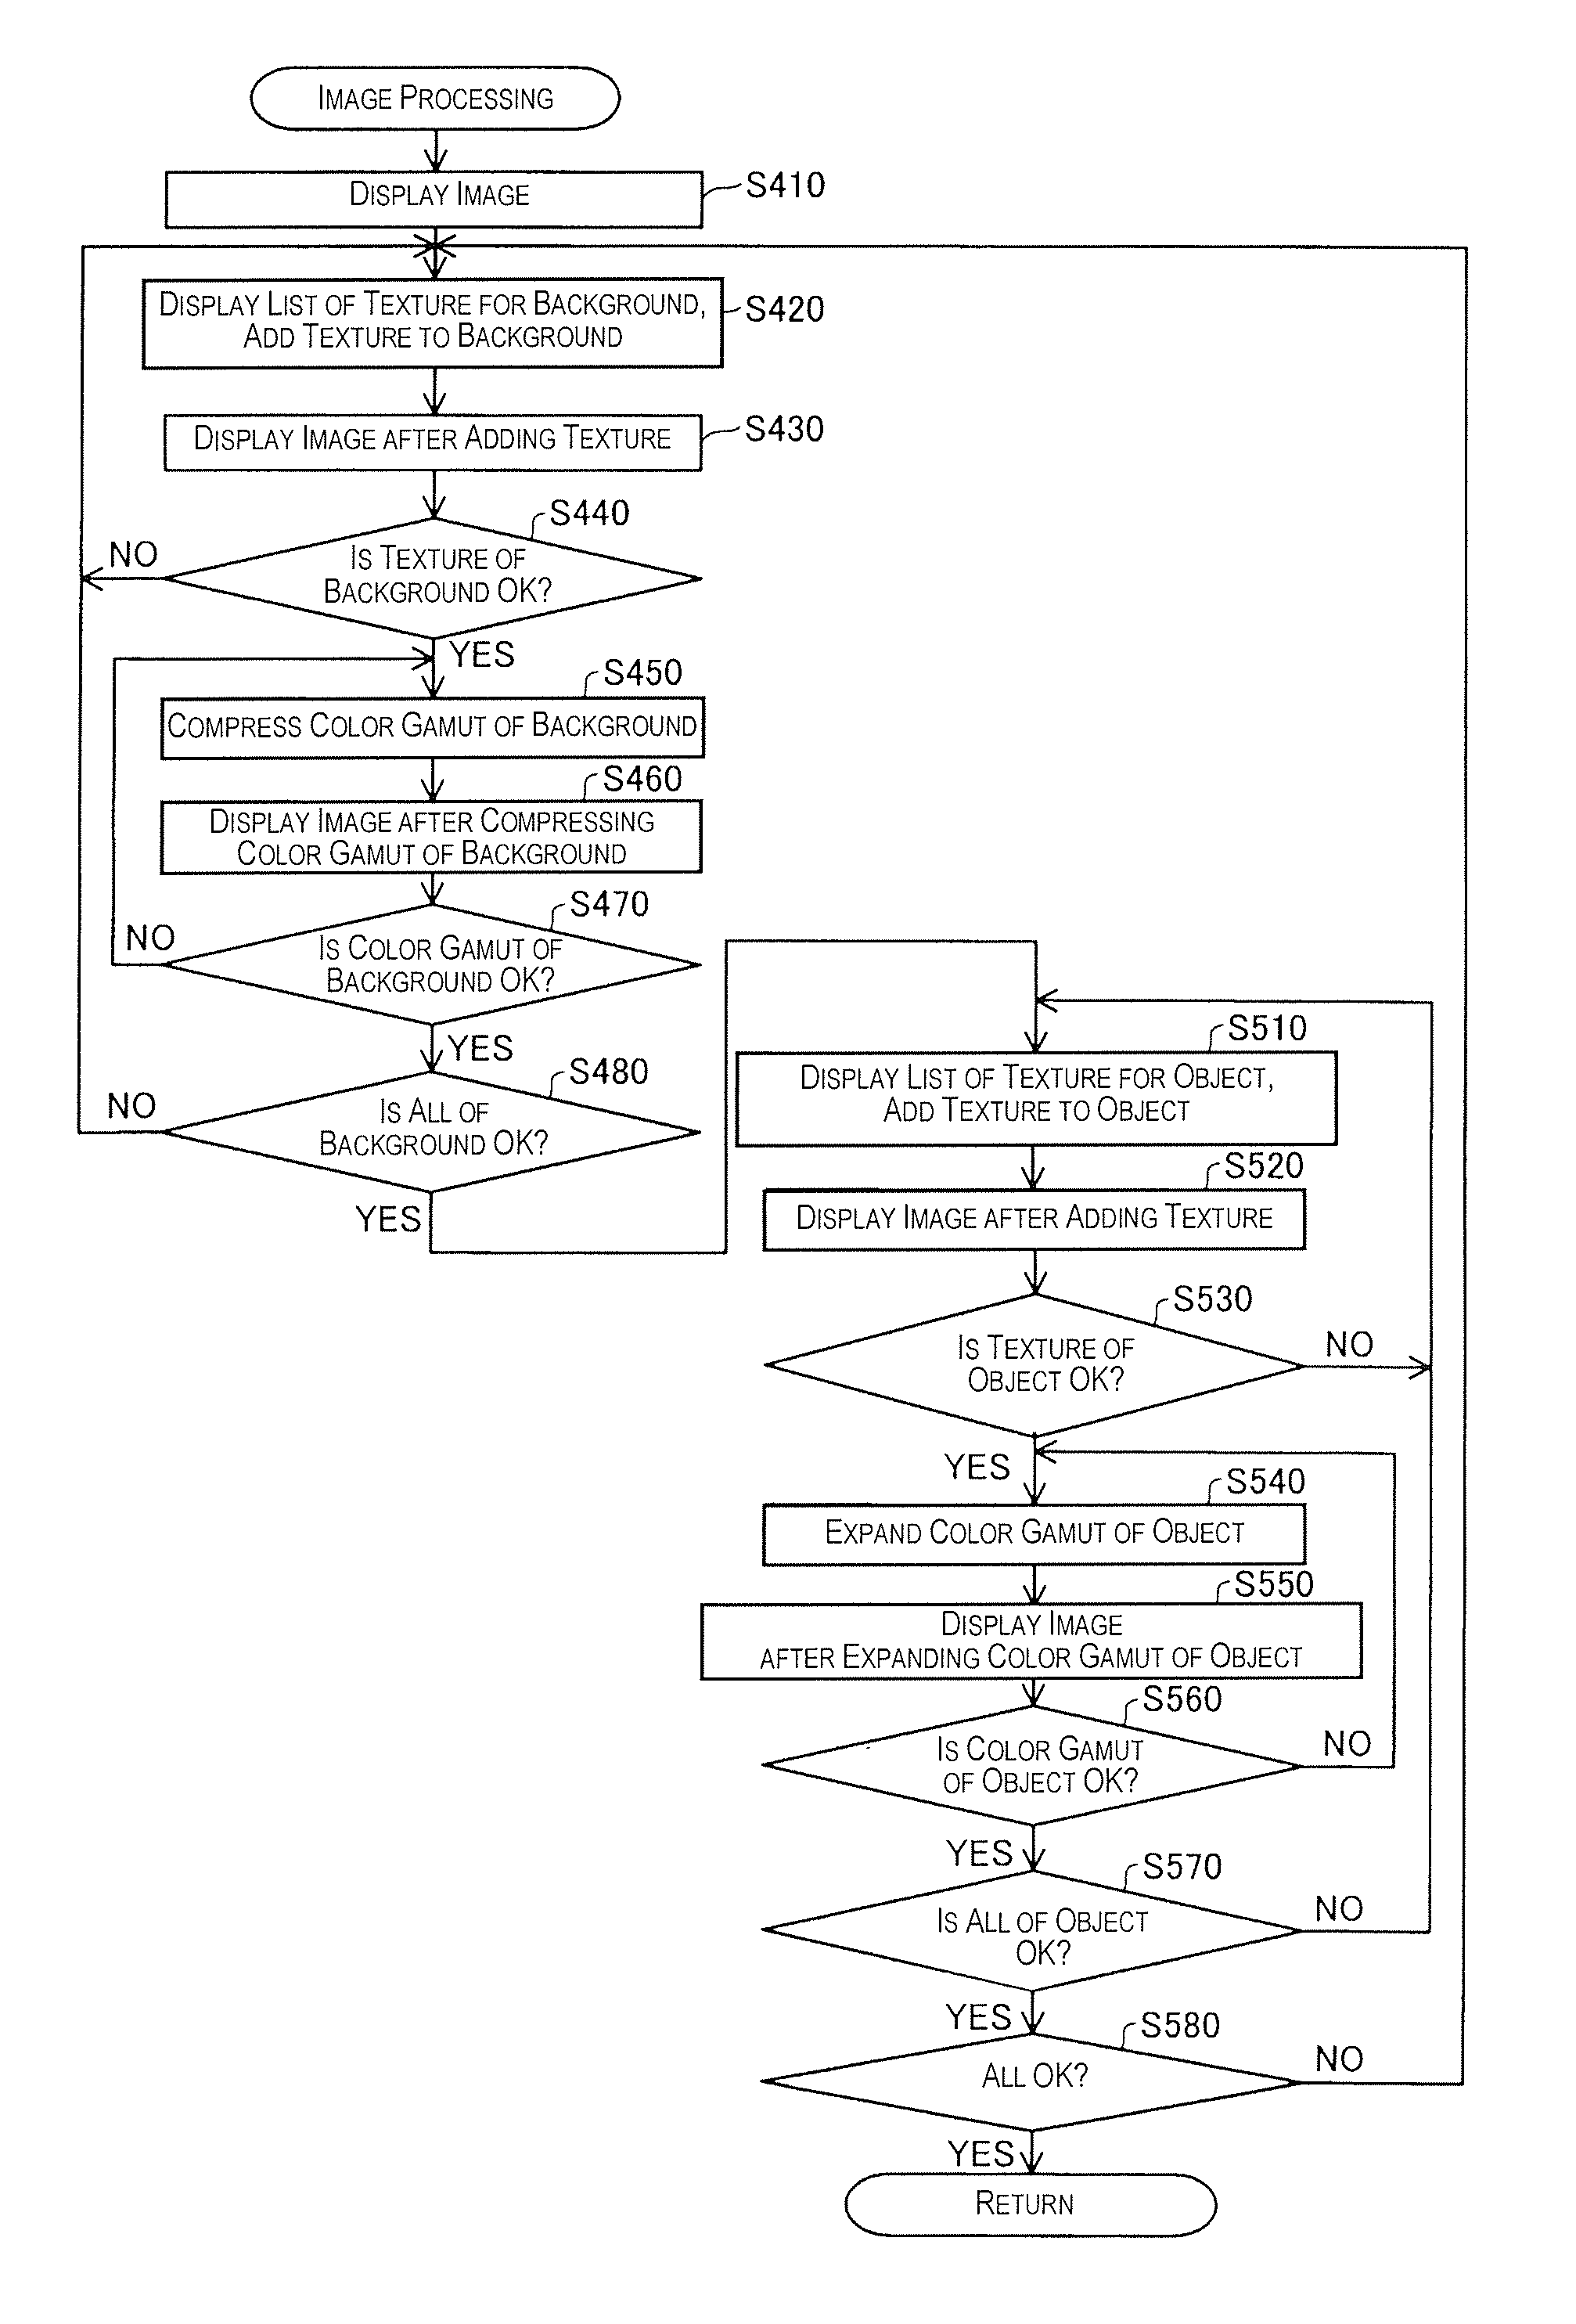 Image processing device and method for adding textures to background and to an object